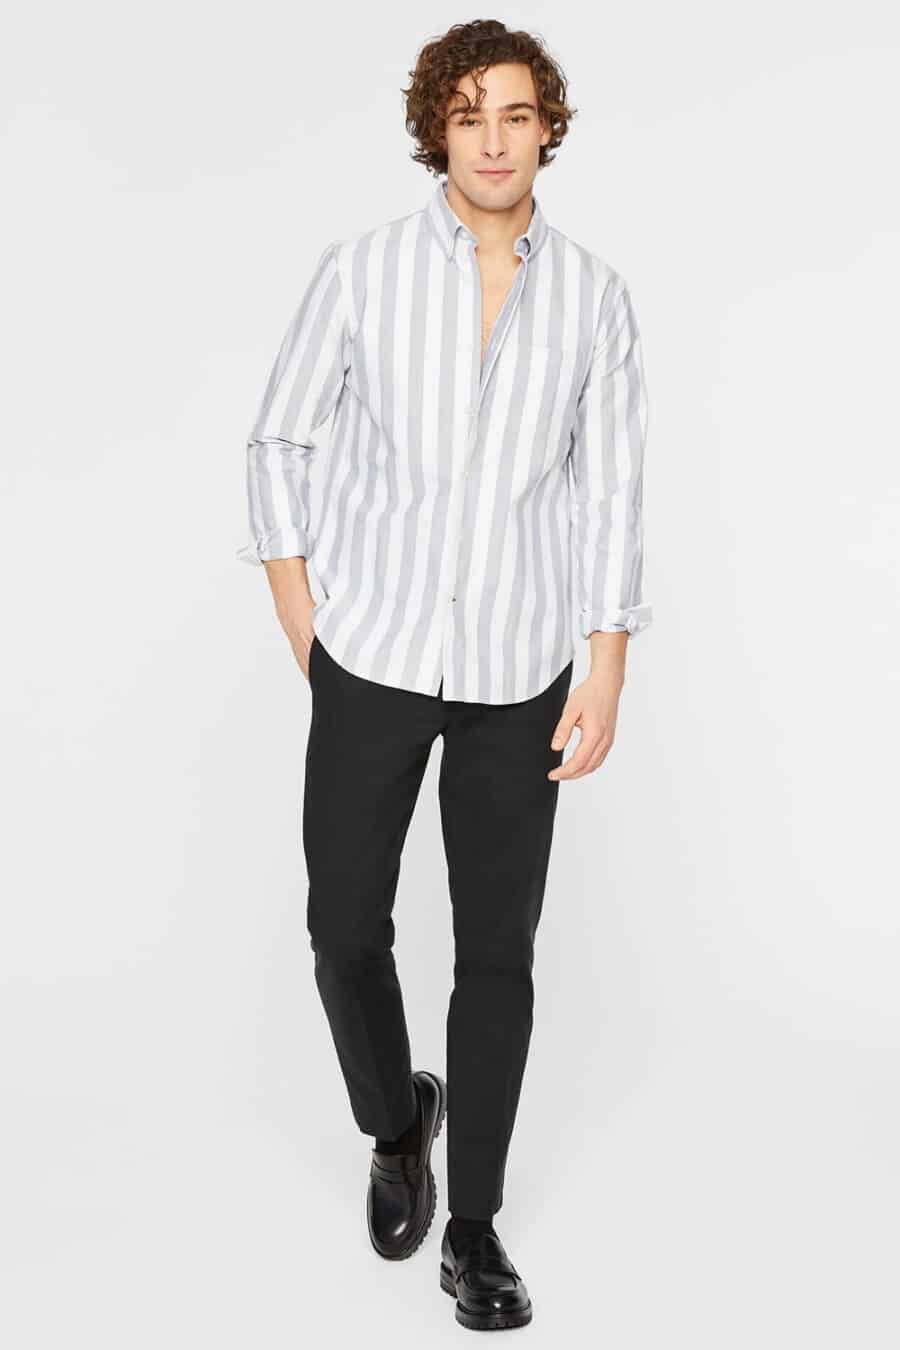 Men's black pants, white and grey vertical stripe shirt and black Derby shoes outfit